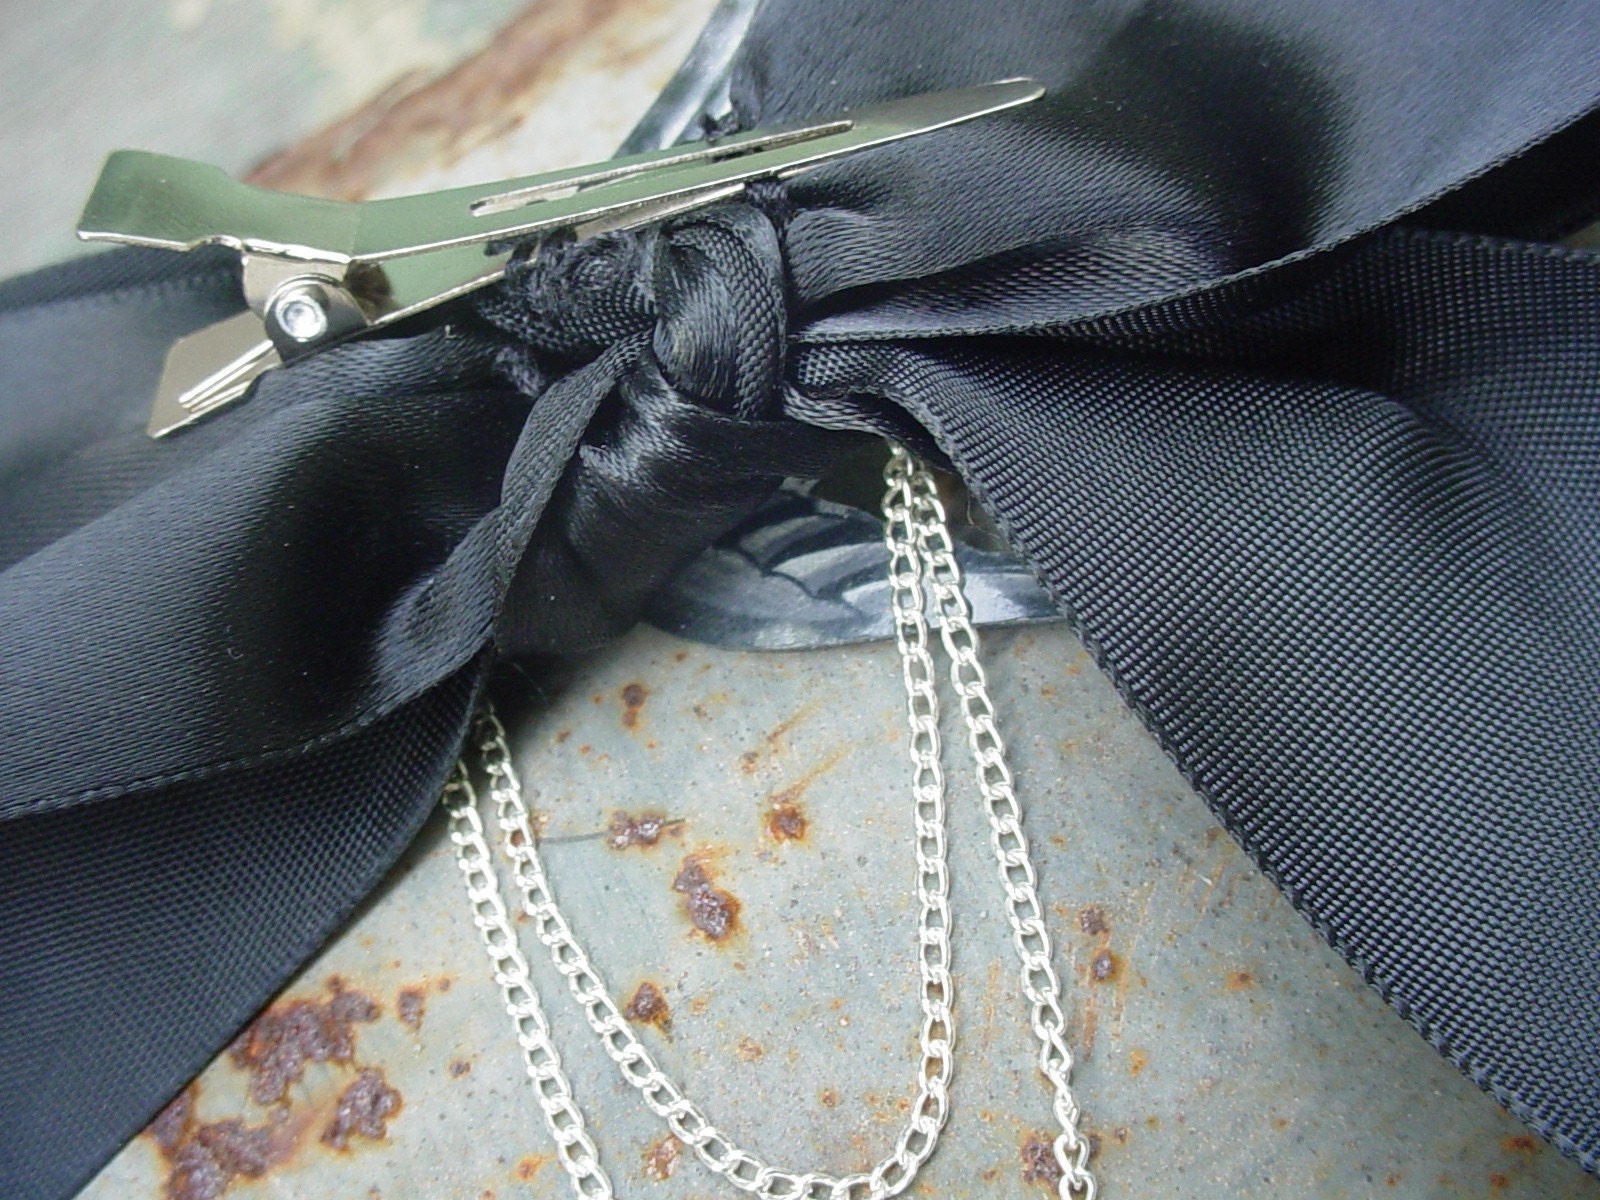 couture lolita black satin hair bow with sparrow and chains